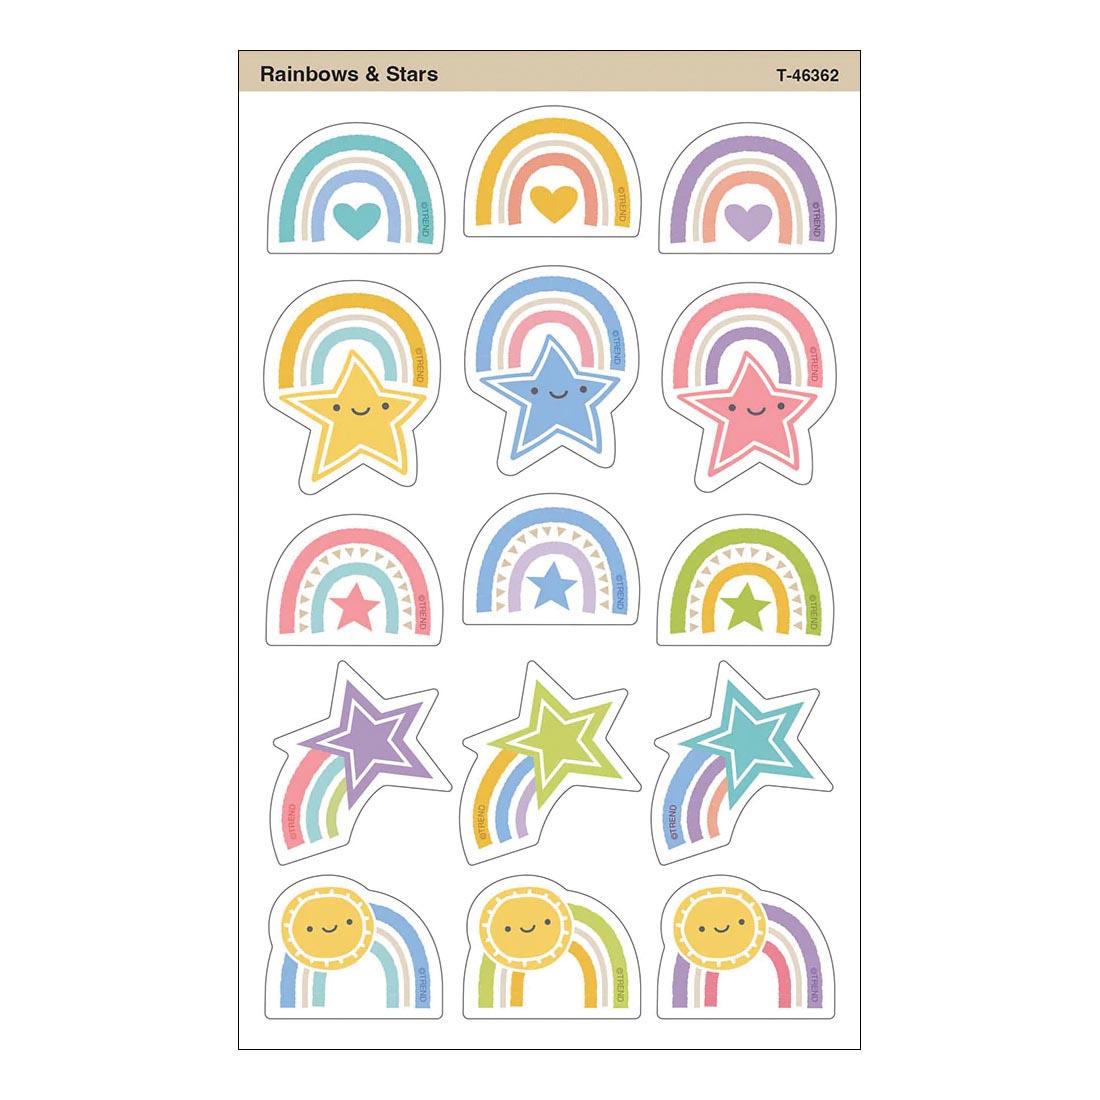 Rainbows & Stars superShapes Stickers from the Good To Grow collection by TREND